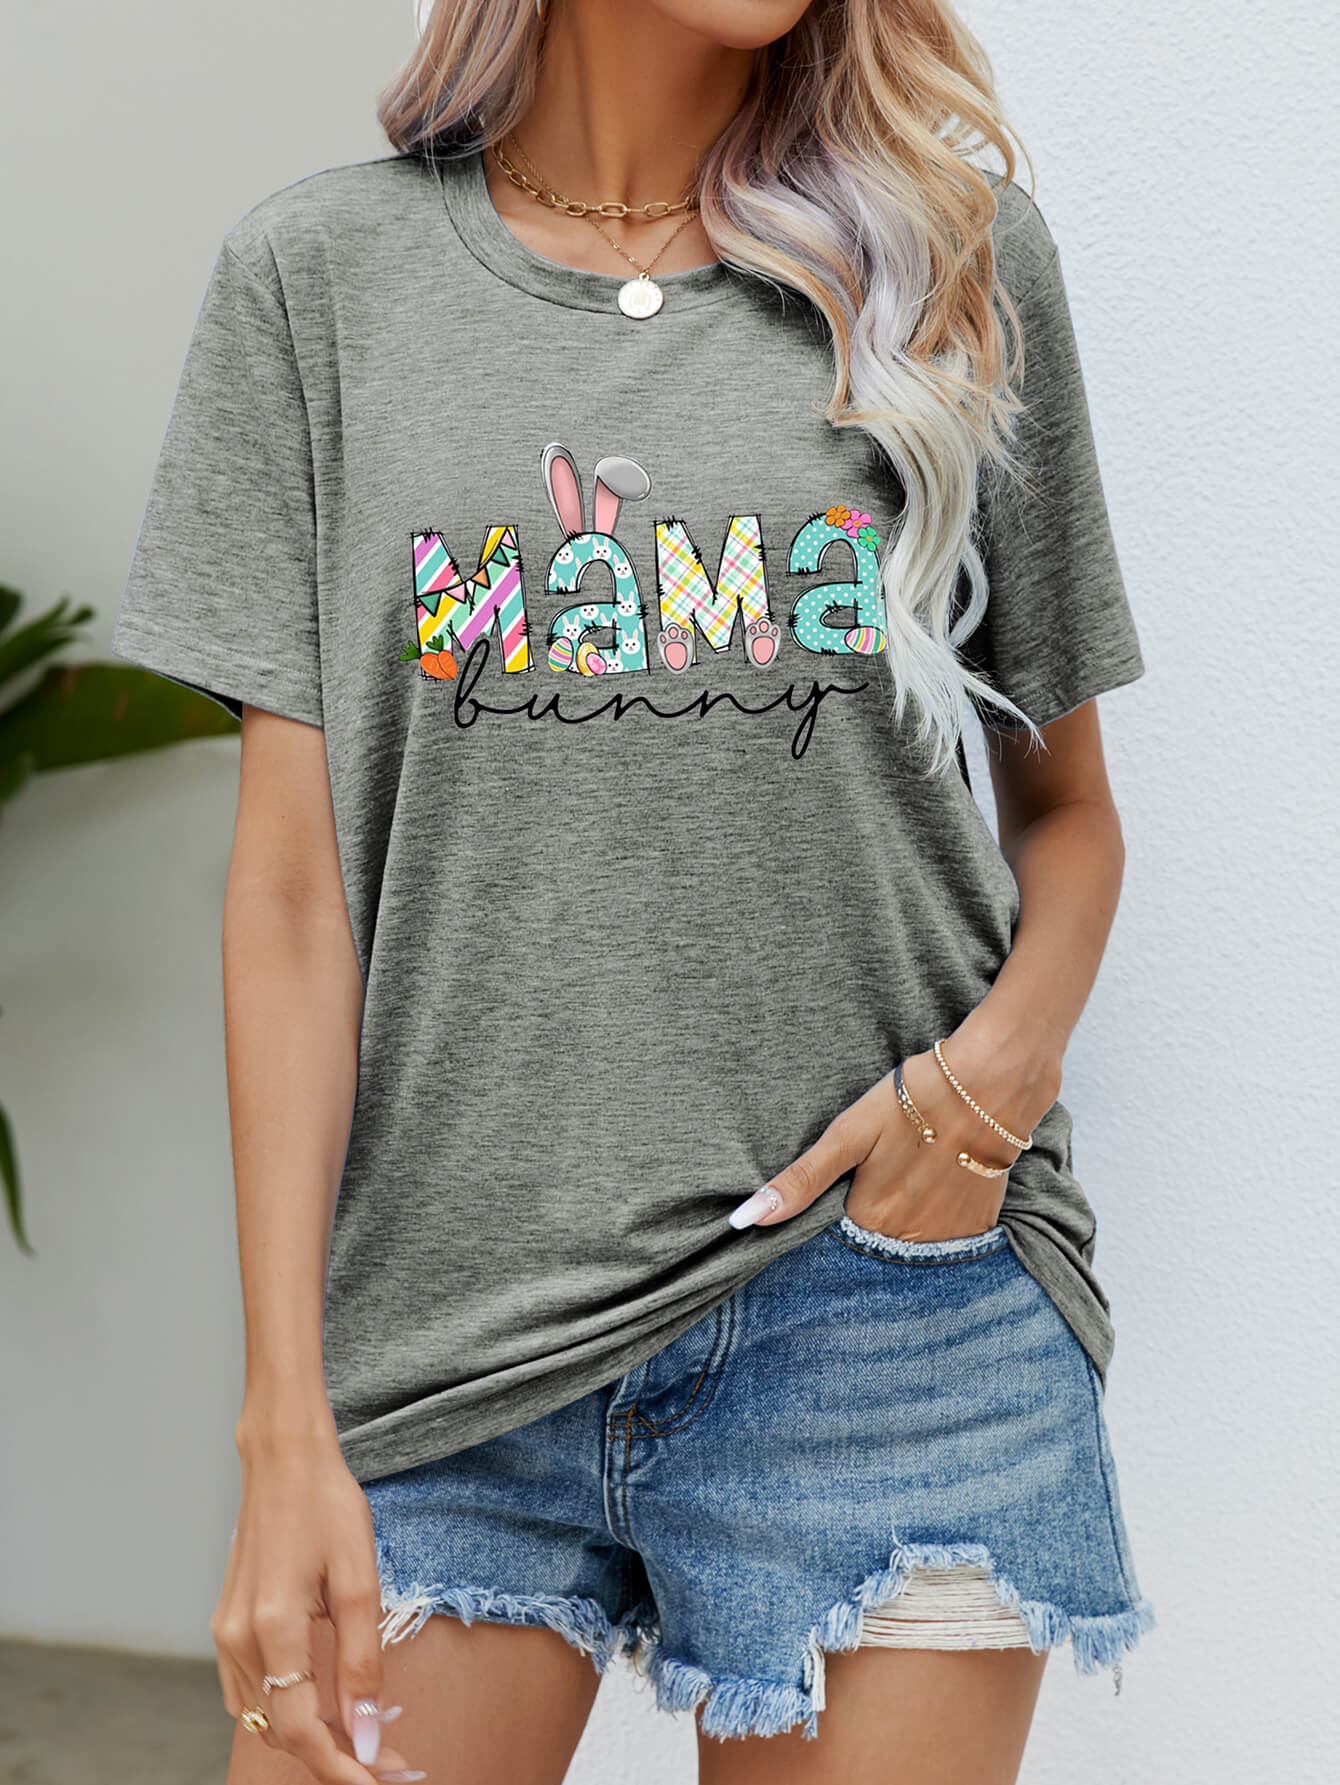 MAMA BUNNY Easter Graphic Tee BLUE ZONE PLANET